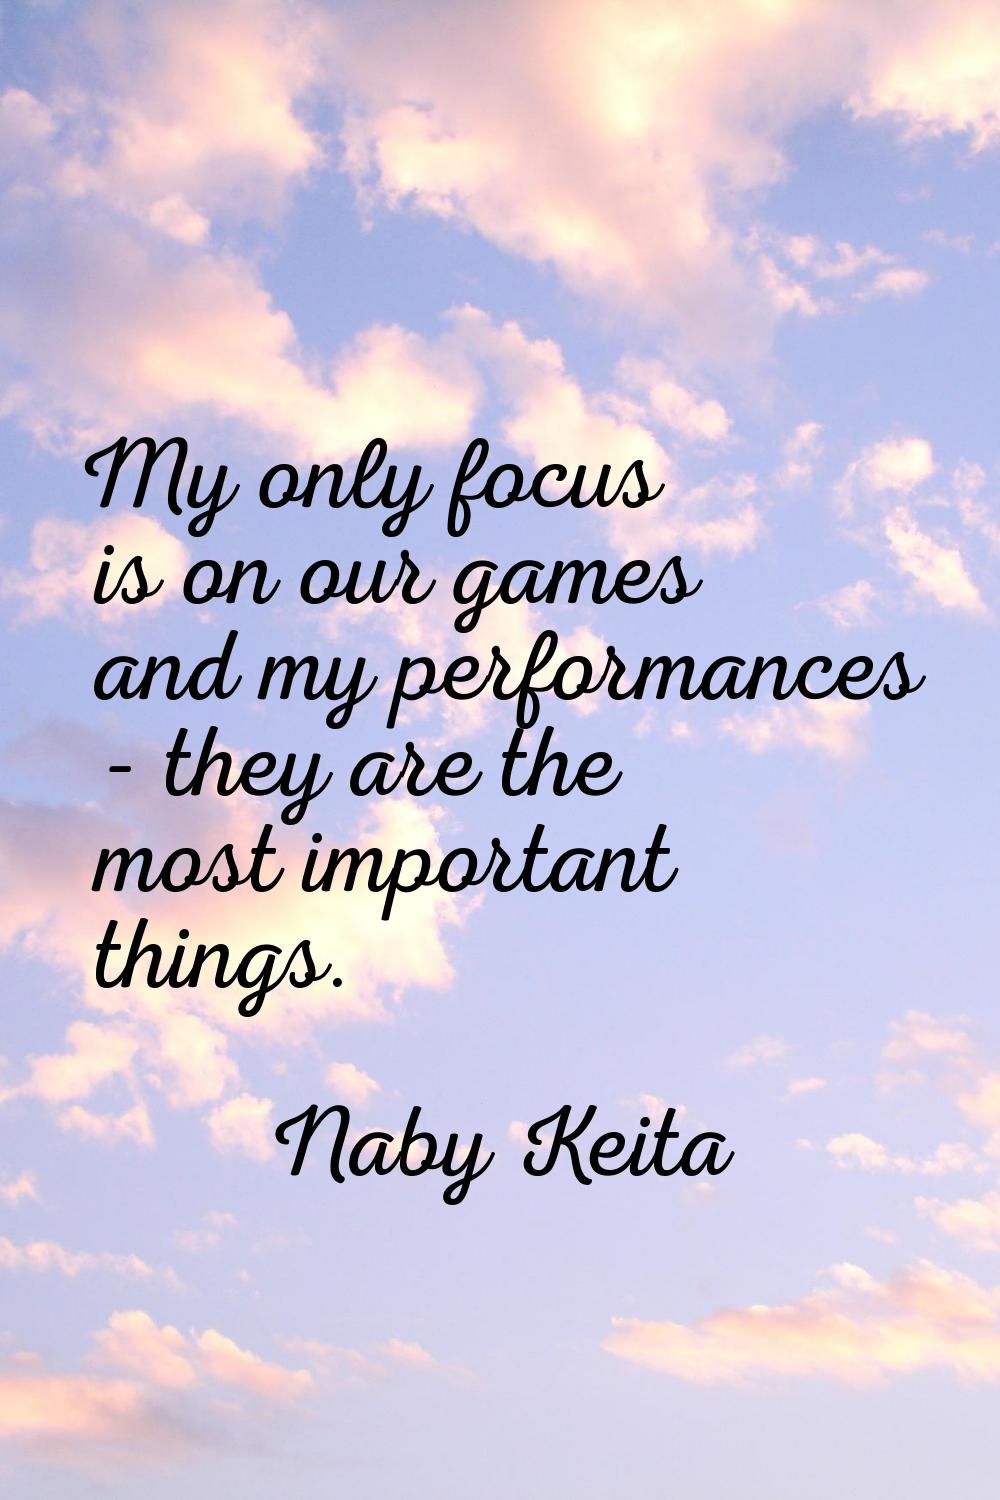 My only focus is on our games and my performances - they are the most important things.